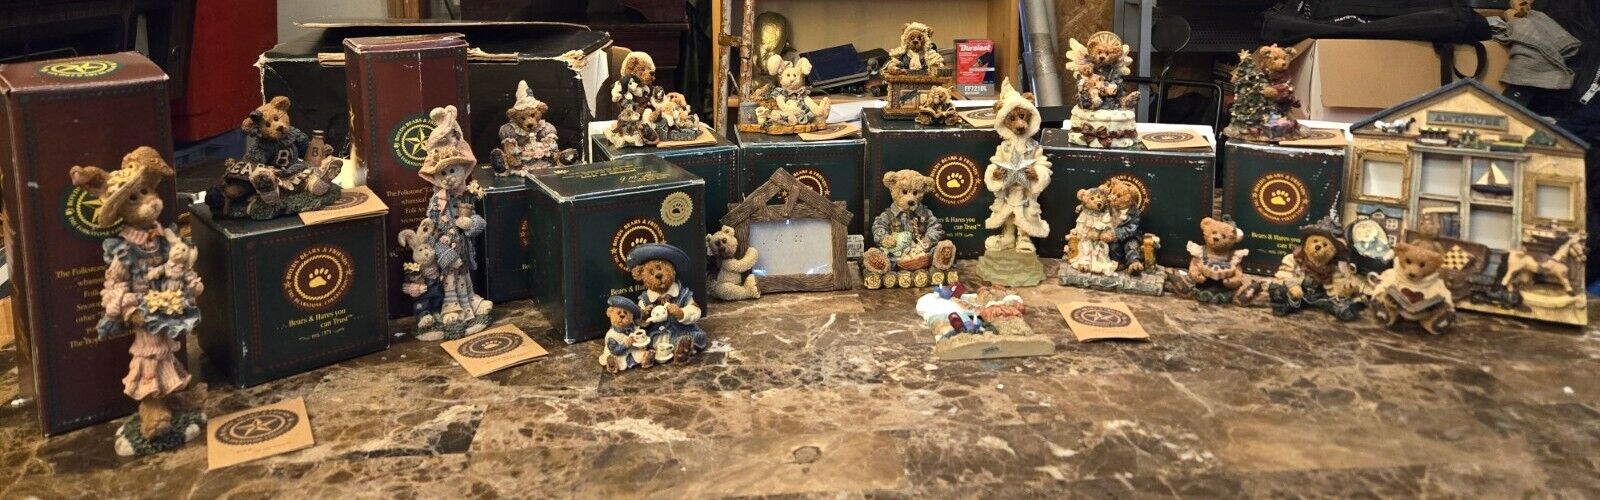 Lot of 19 Vintage Boyds Bears Resin Figurines Picture Frames AS IS